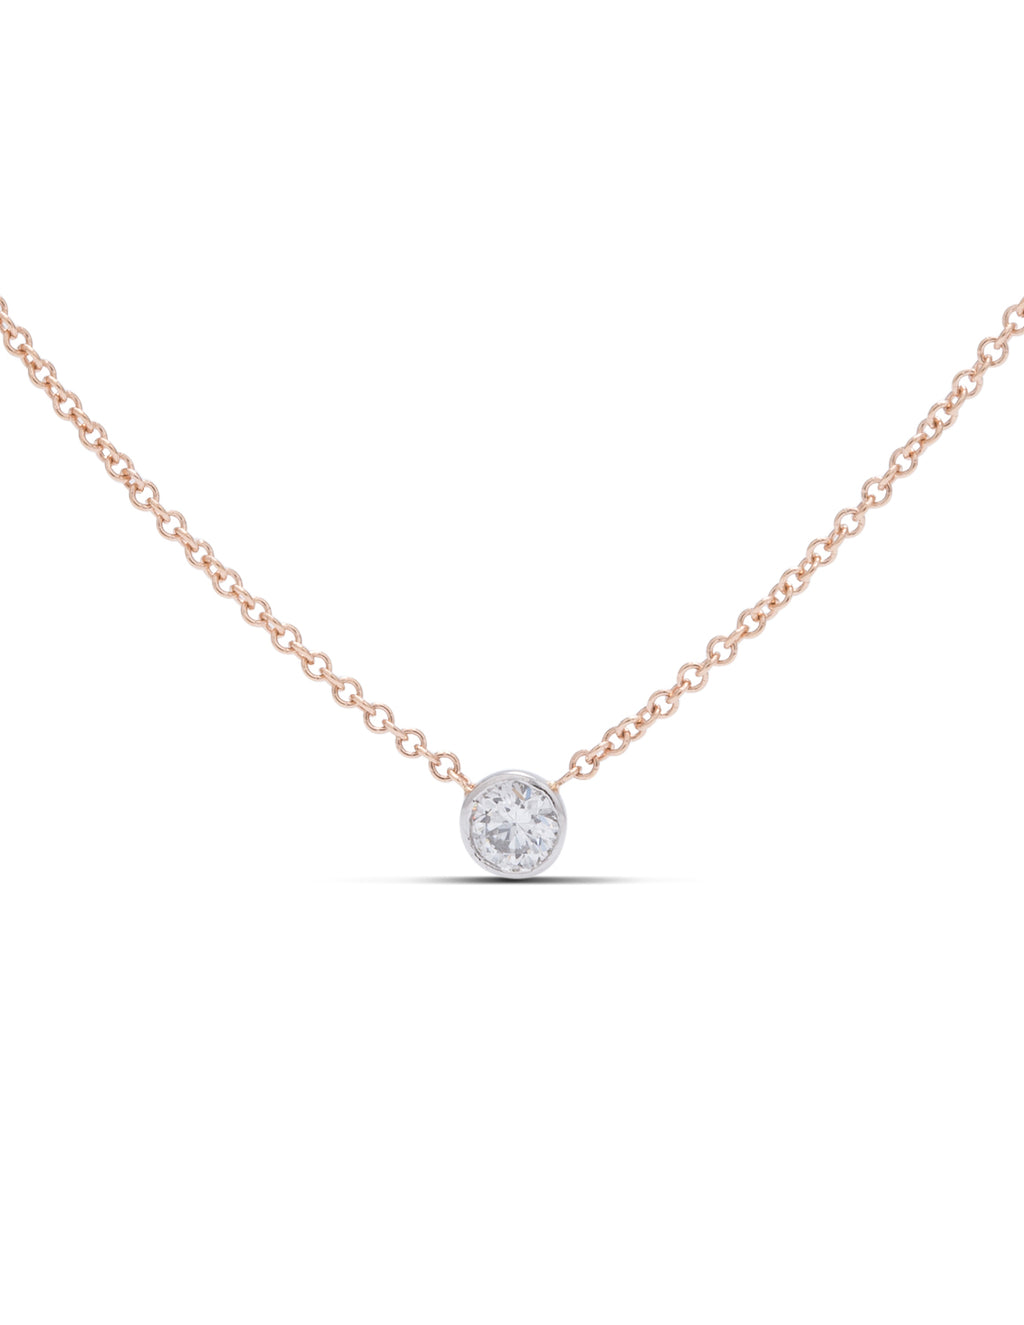 Delicate Bezel Set Diamond Solitaire Necklace - Charles Koll Jewellers